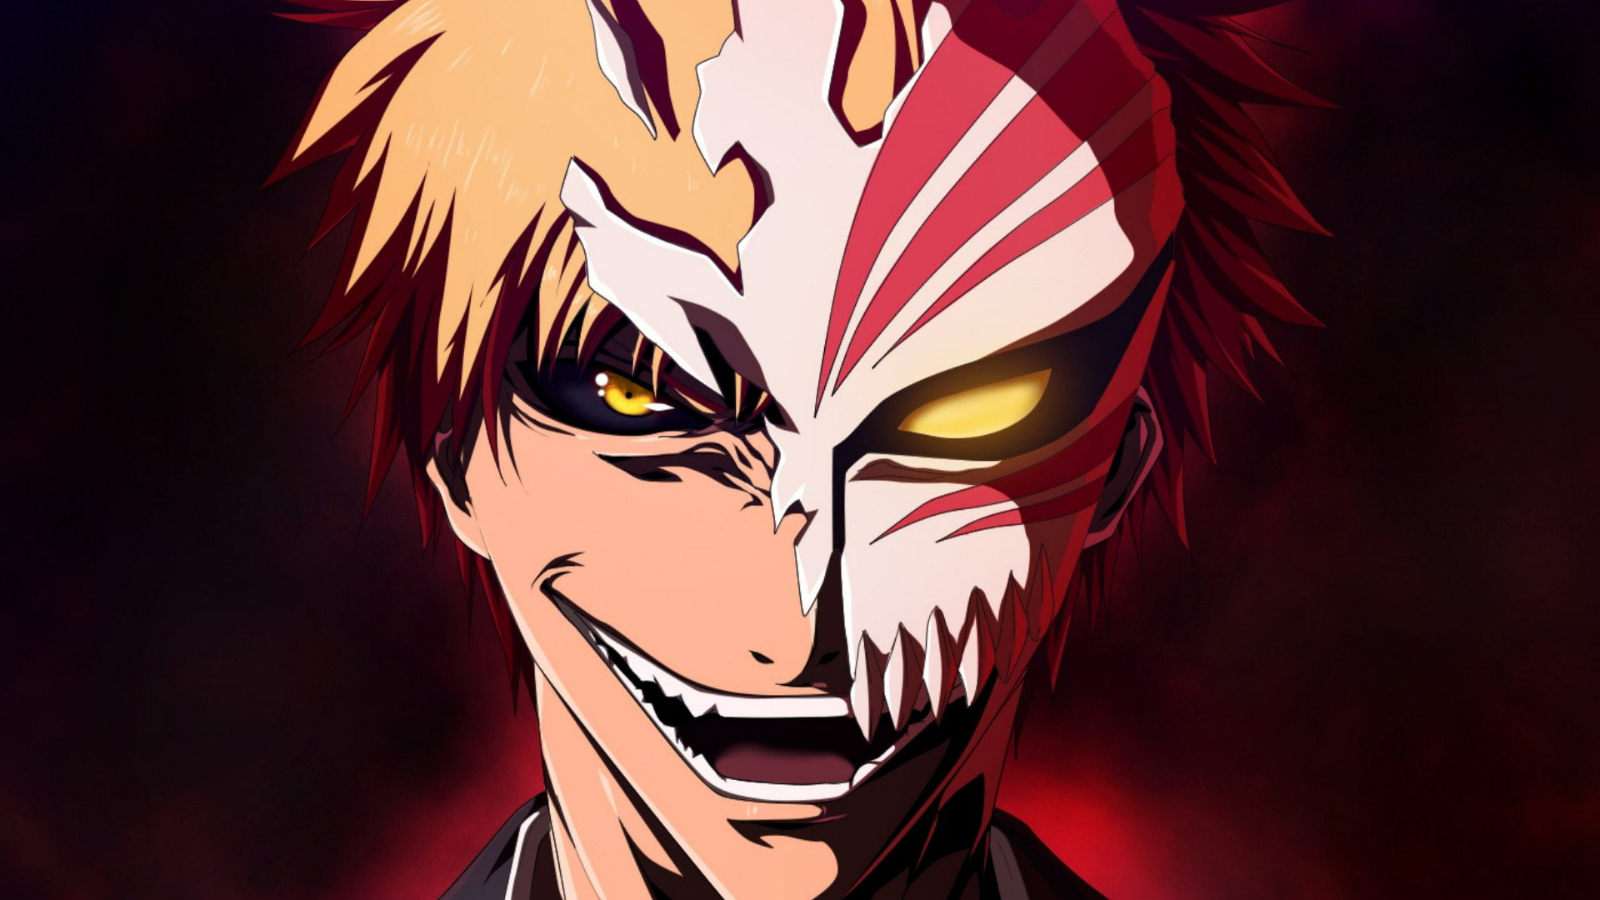 Bleach ThousandYear Blood War Trailer and Key Art Revealed at Anime Expo  2022  IGN